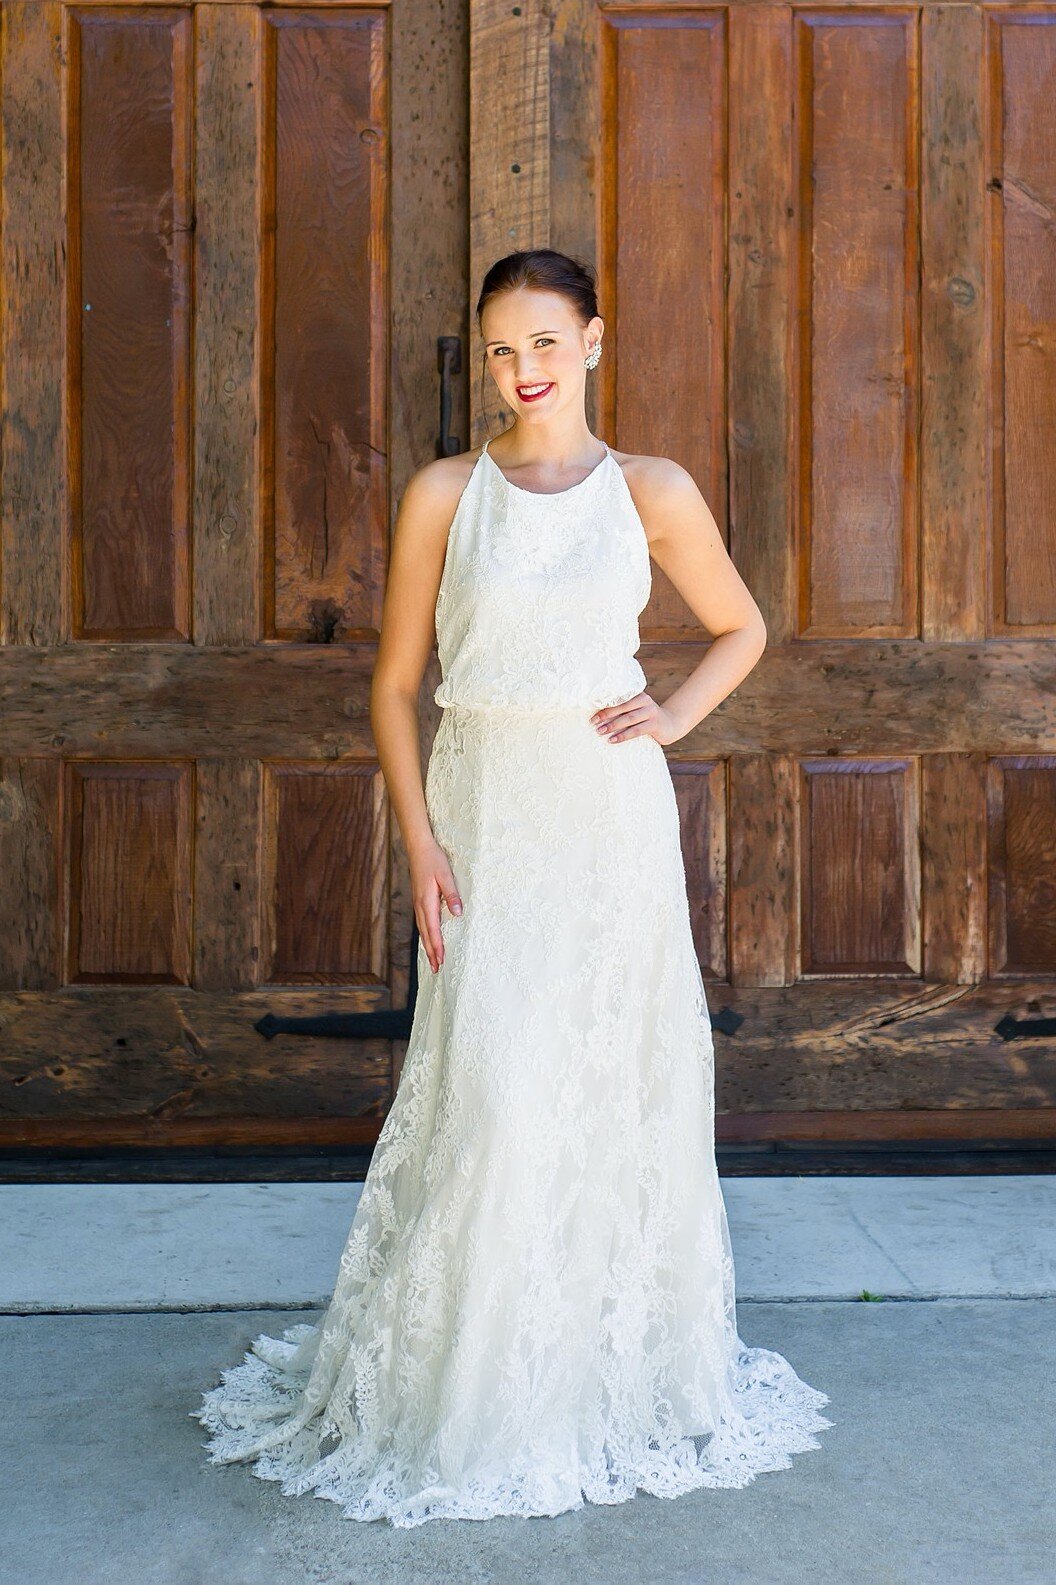 Sabine is an all-lace wedding dress with a bloused, high-neck bodice by bridal designer Edith Elan of Charleston, SC.